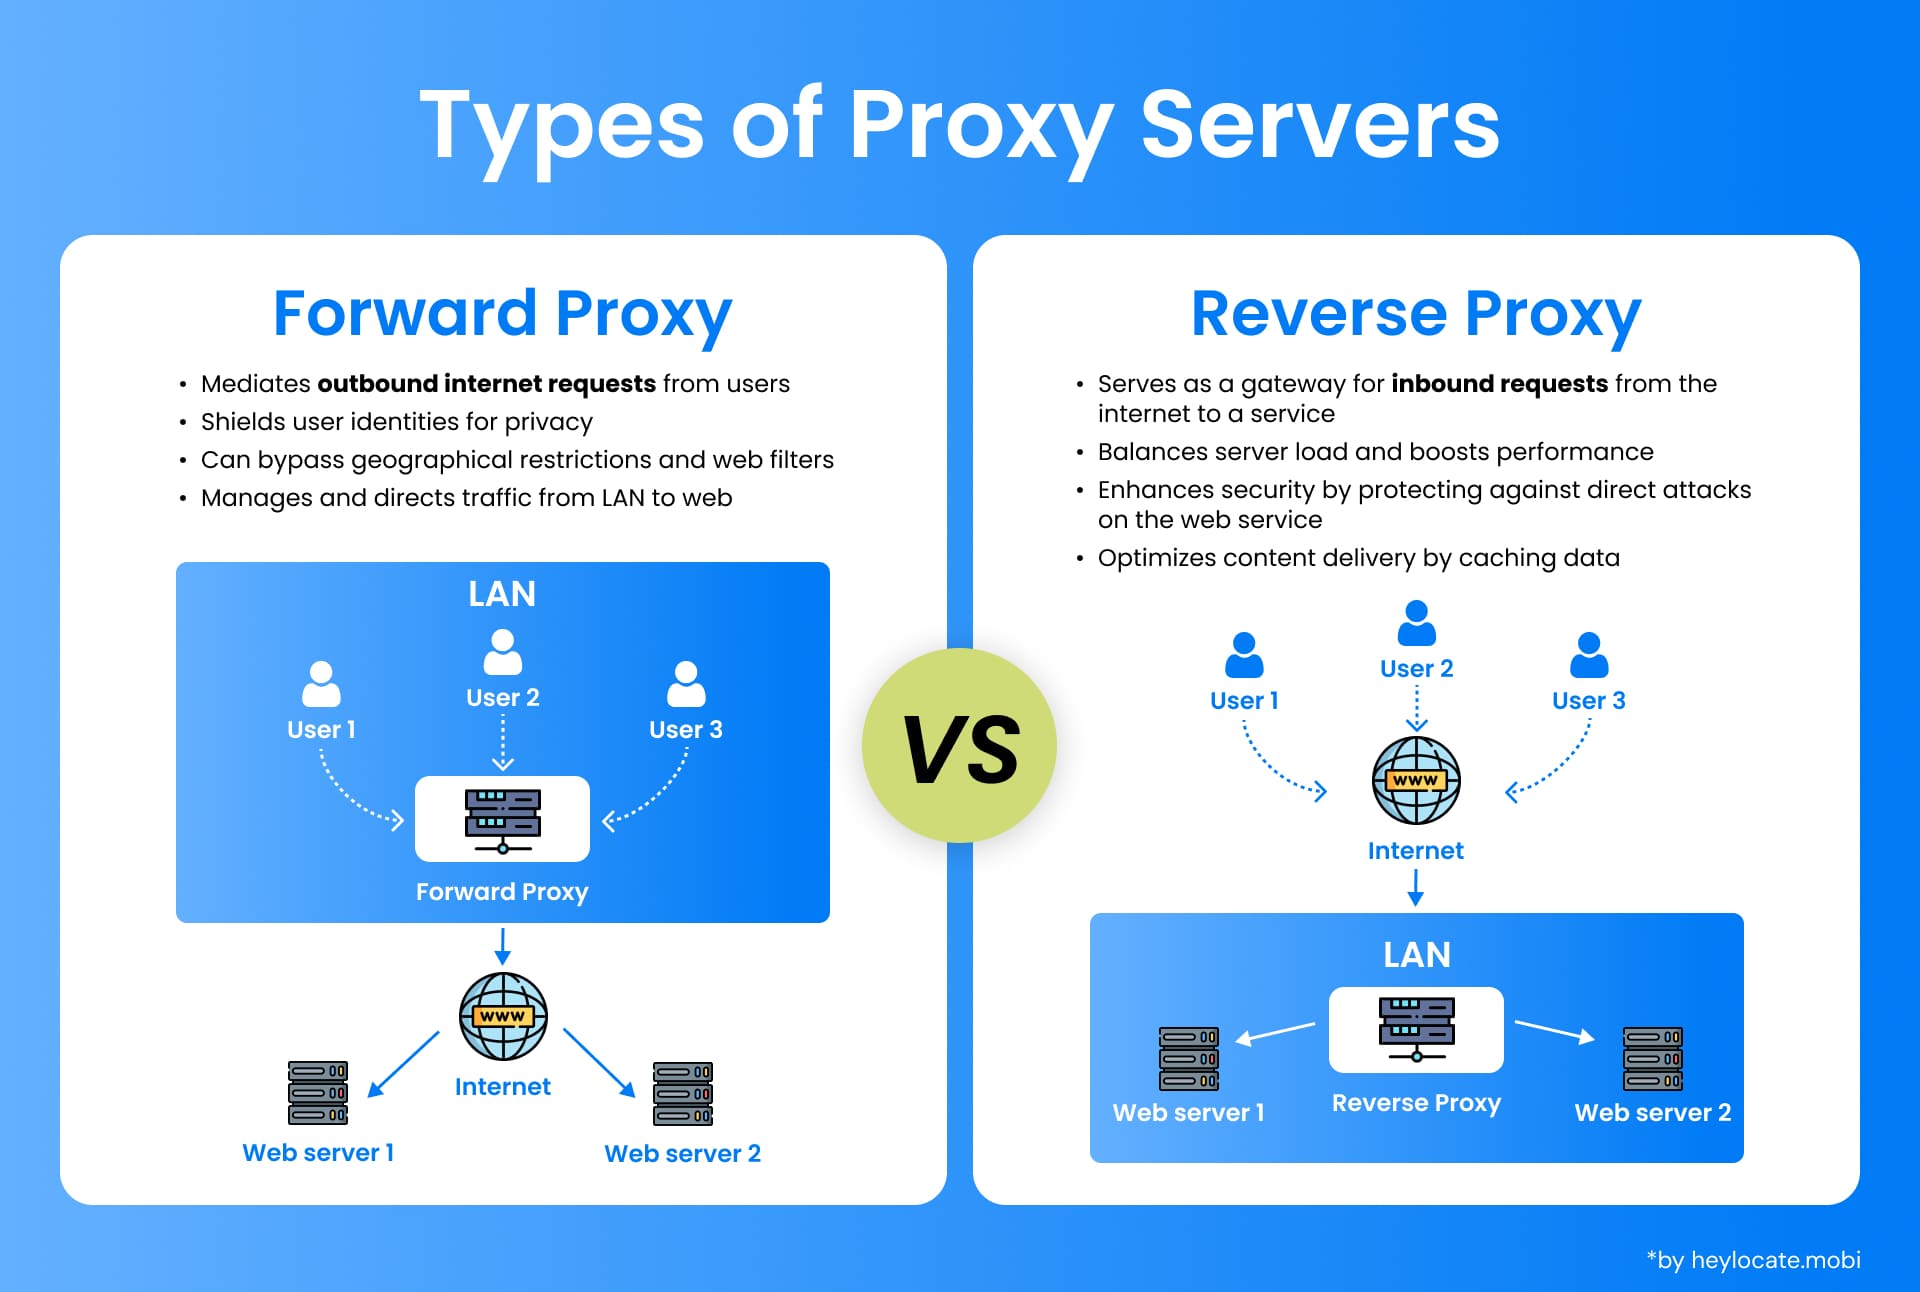 A visual comparison between forward and reverse proxy servers, illustrating their different roles in network architecture and internet communication